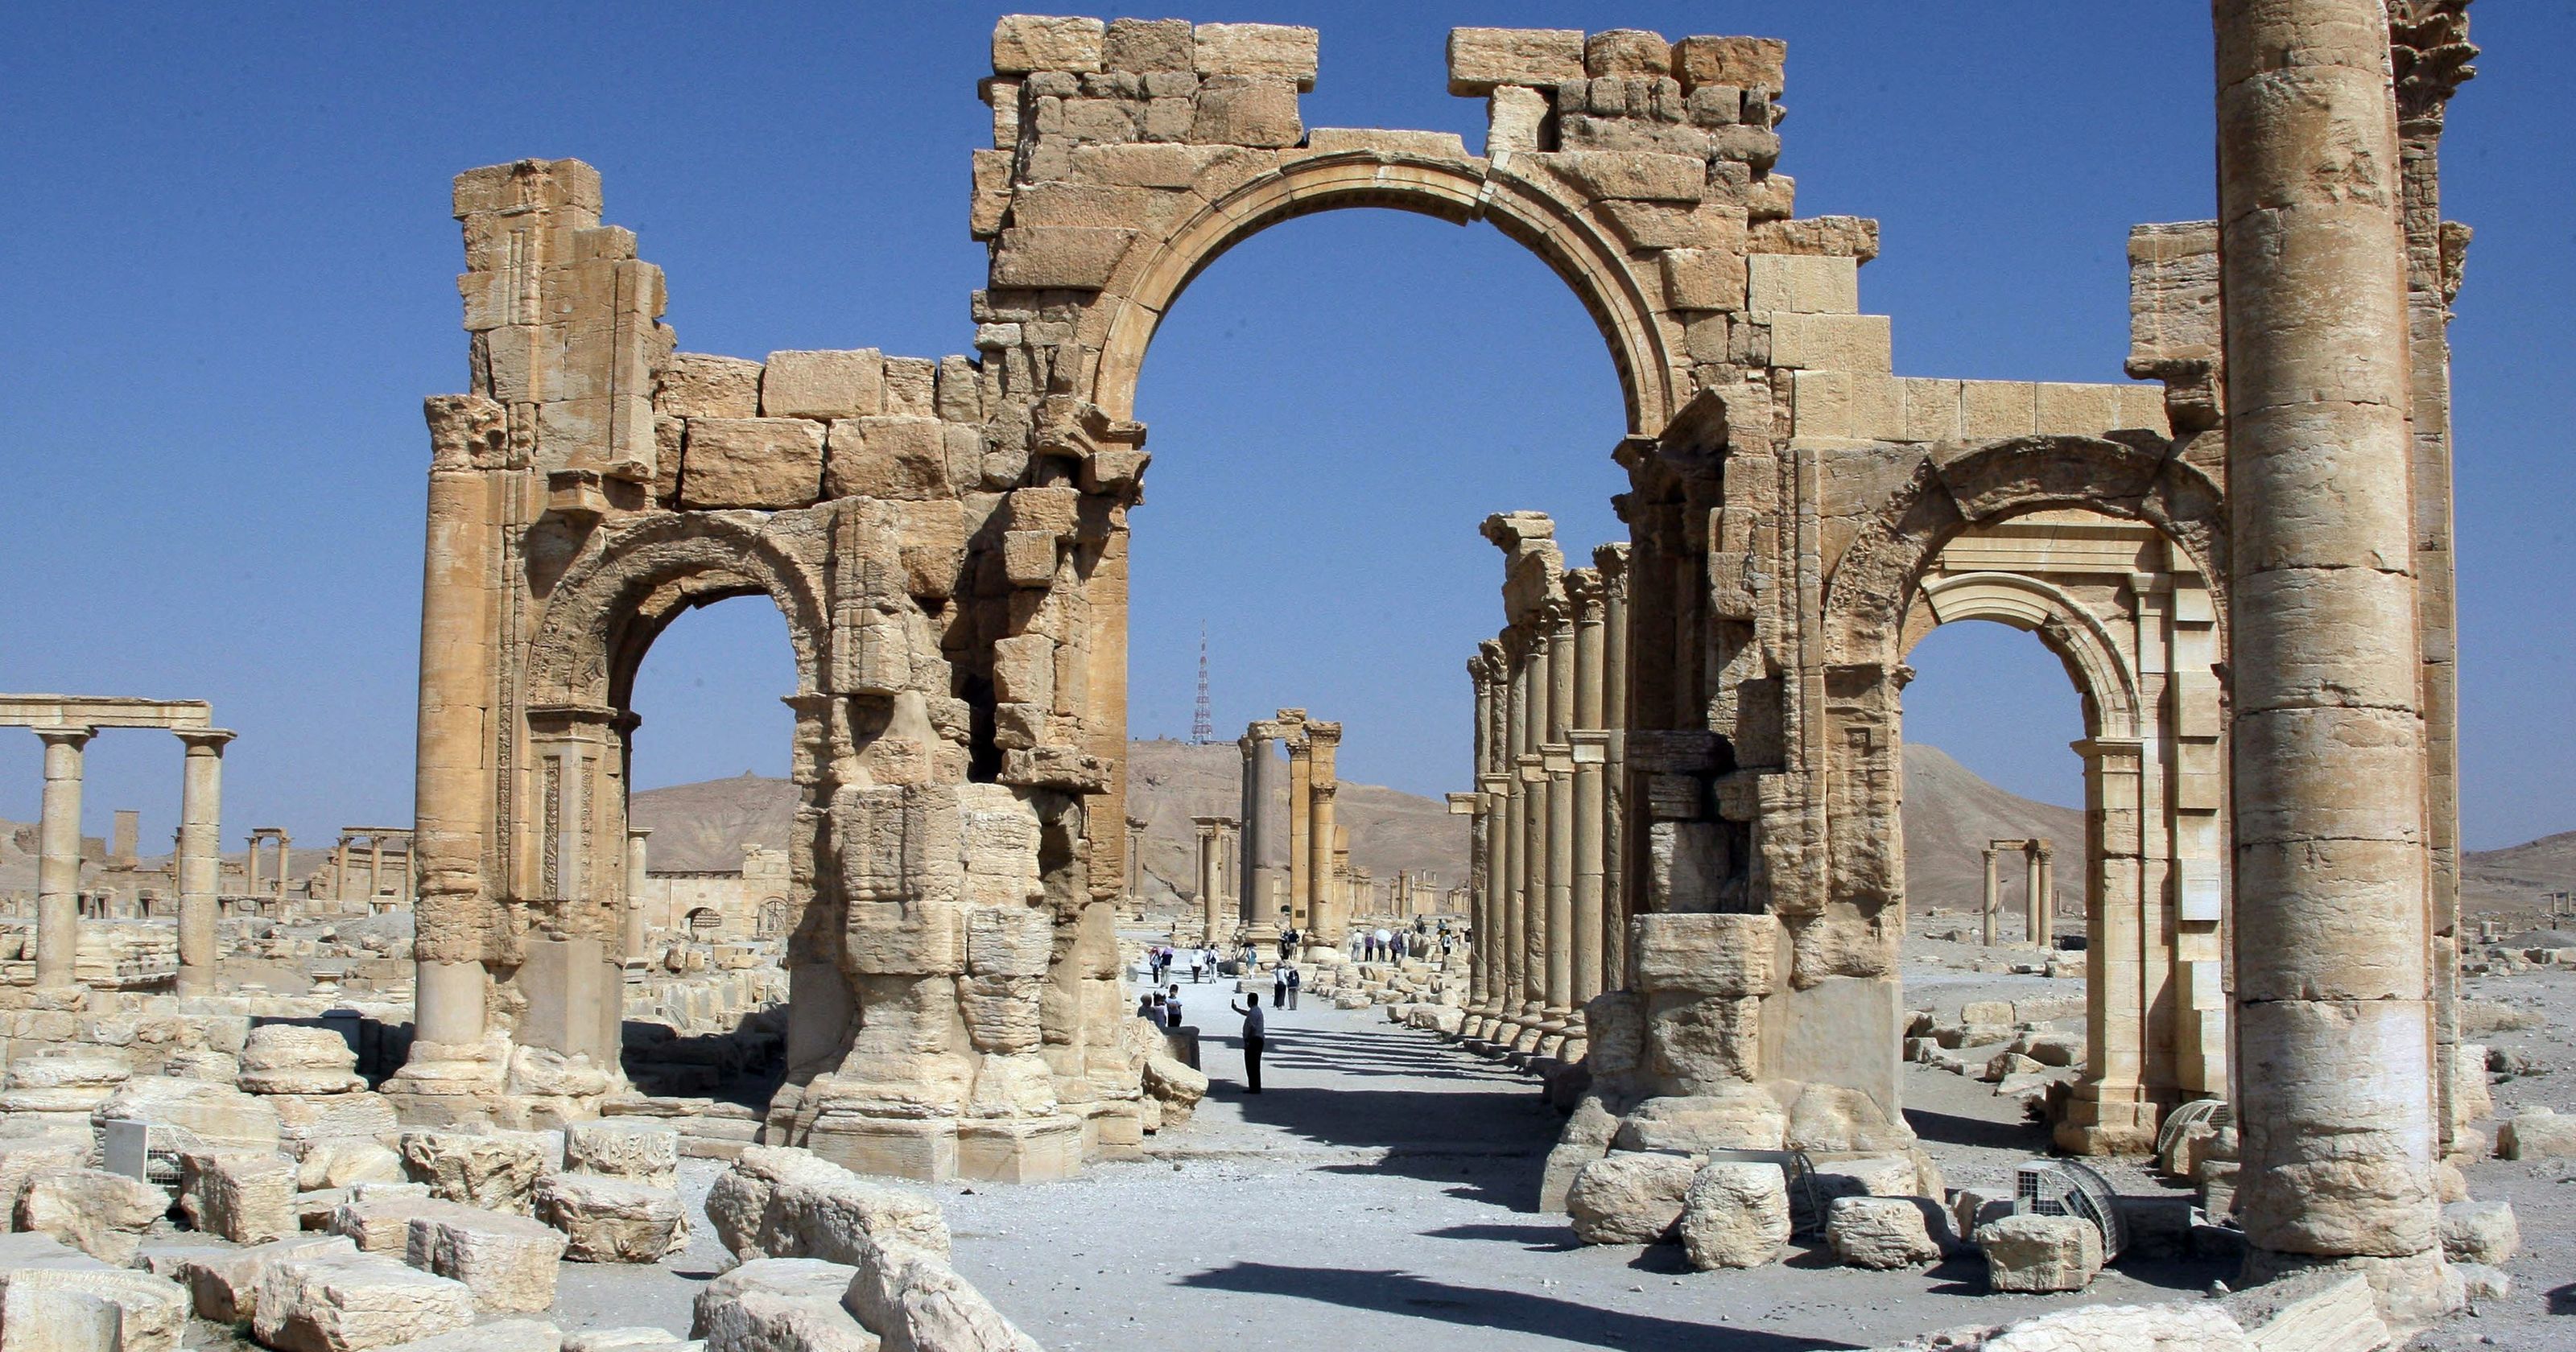 Officials: ISIL destroys Palmyra's Arch of Triumph